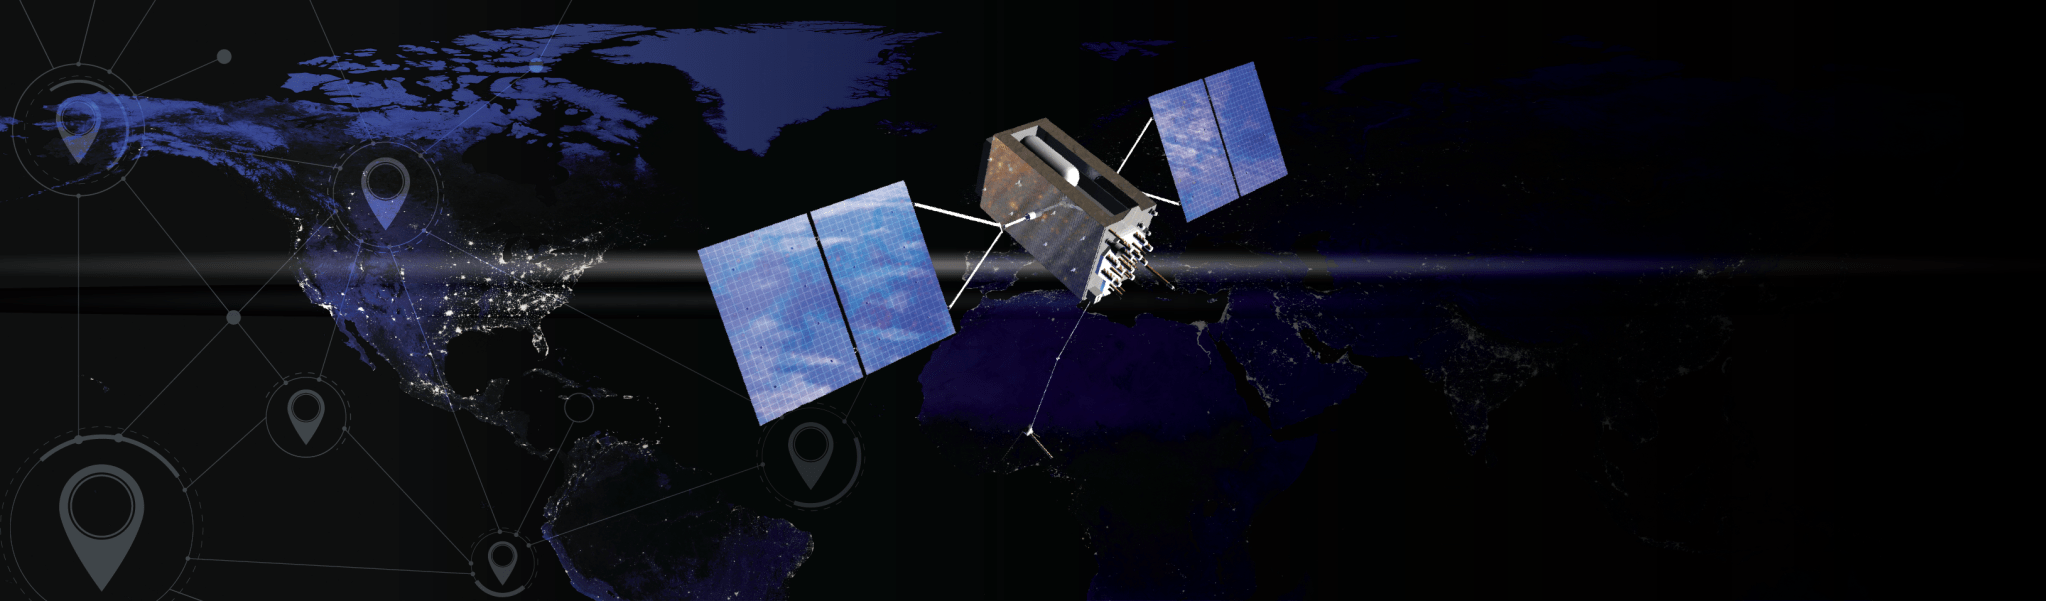 Graphic image of a Global Positioning System (GPS) satellite with a black background.